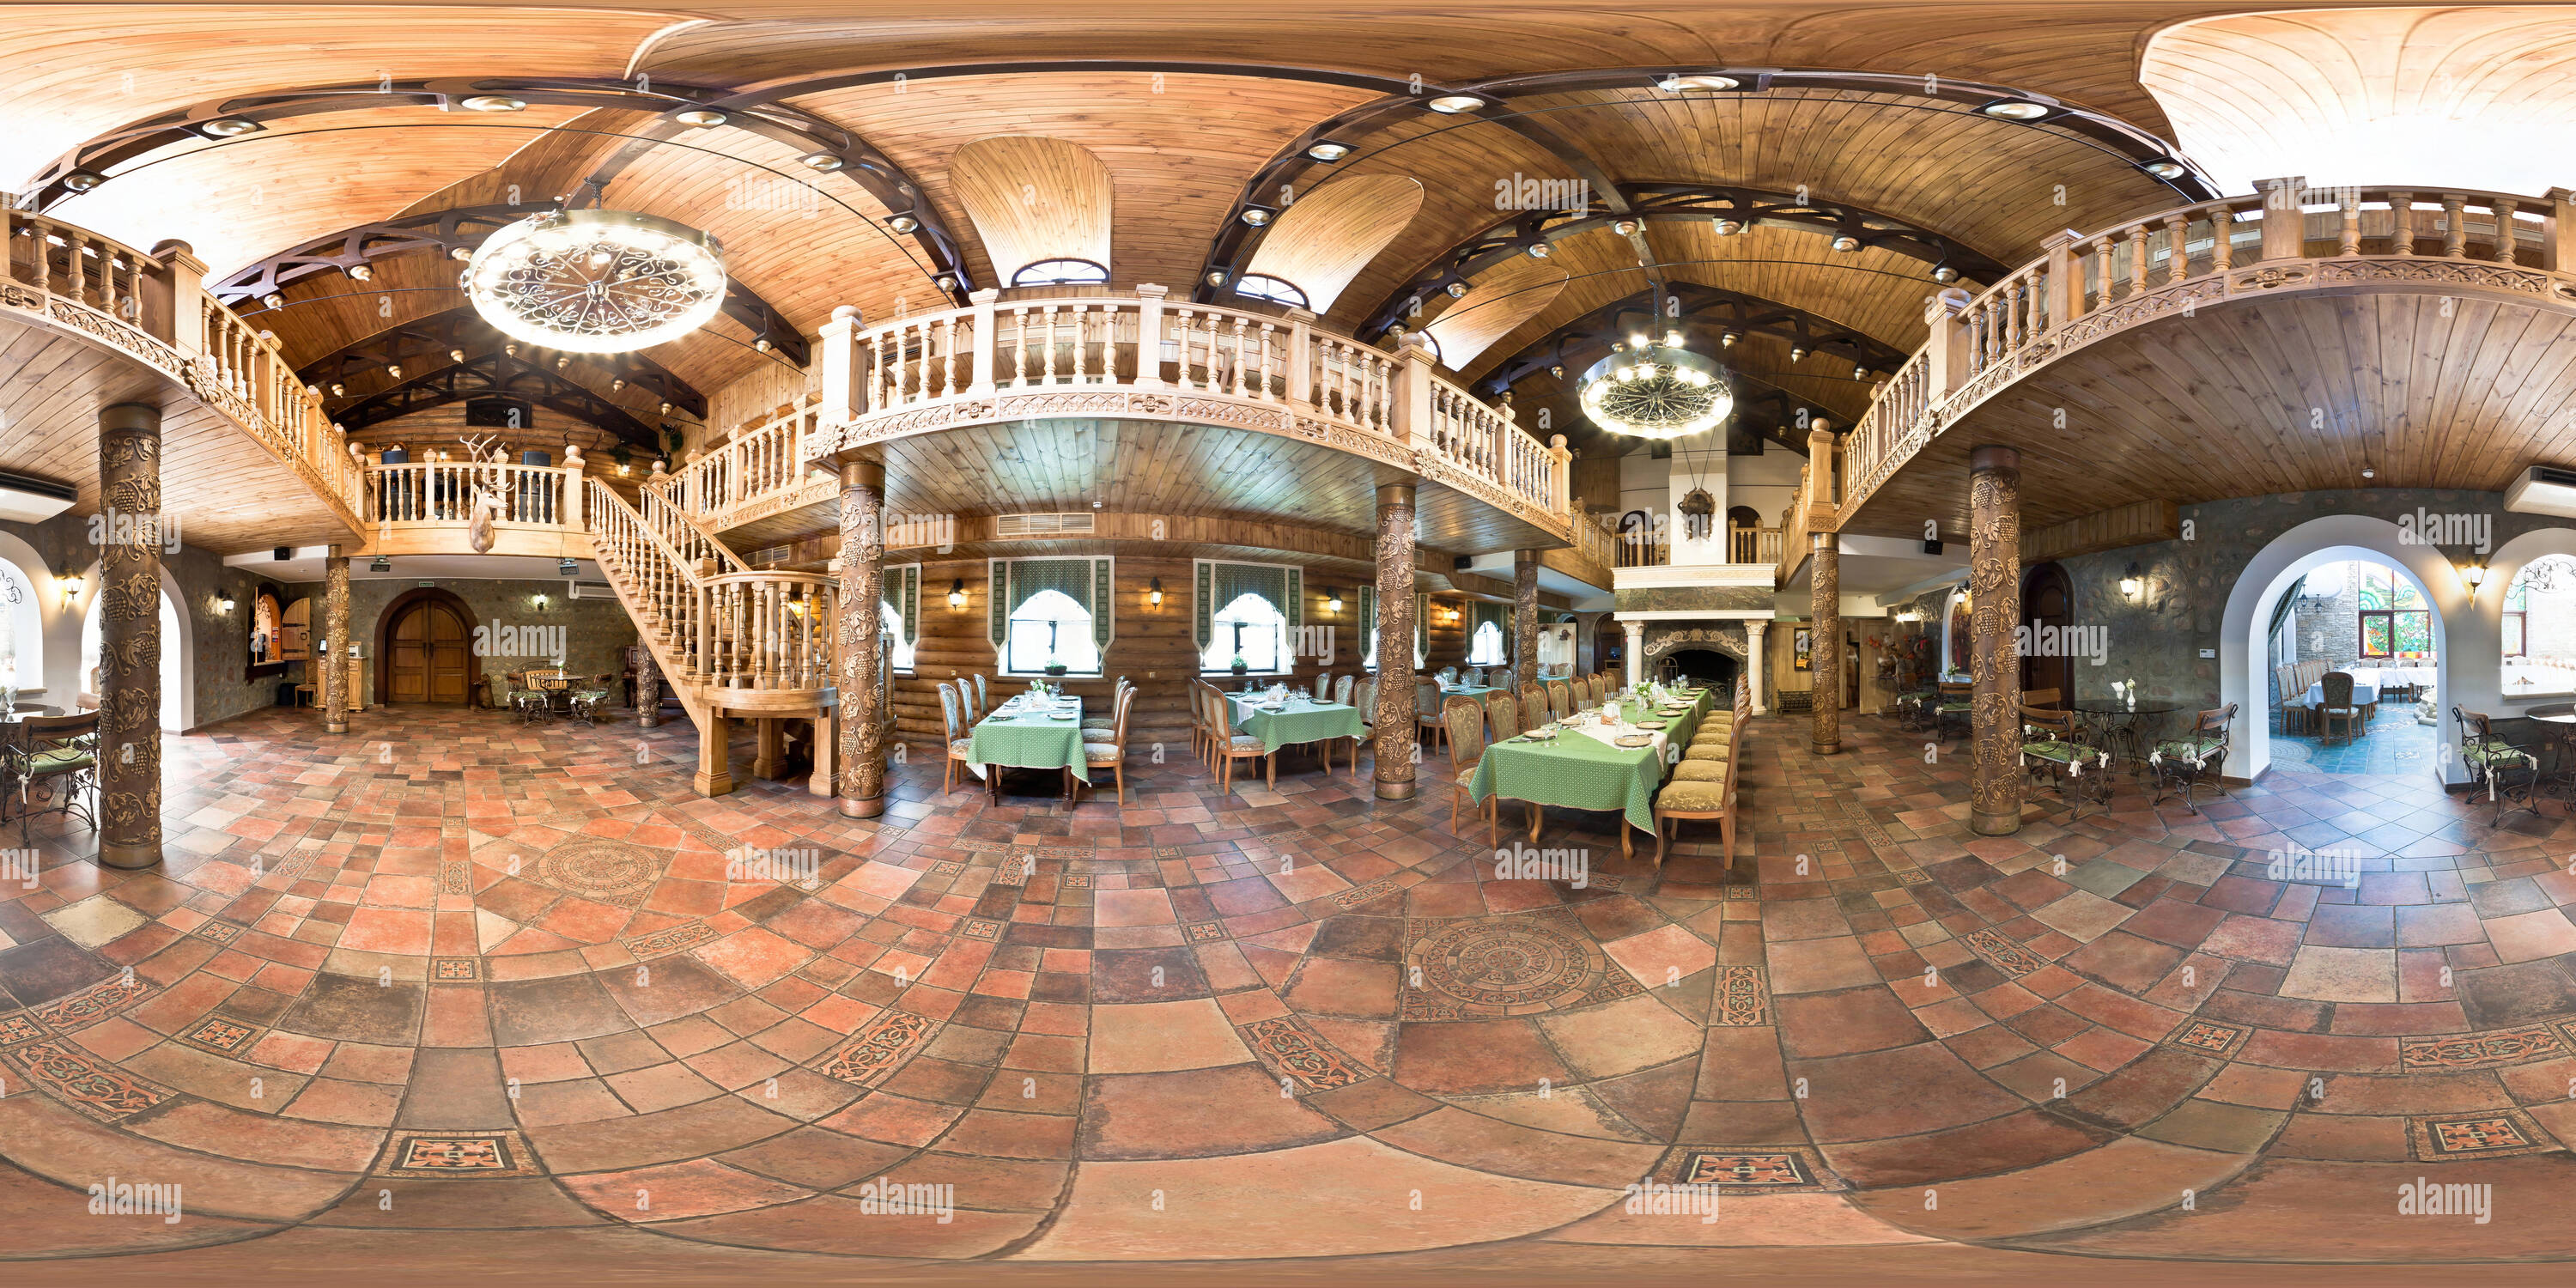 360 degree panoramic view of GRODNO, BELARUS - SEPTEMBER 18, 2010: Full 360 panorama in equirectangular spherical equidistant projection in interier banquet hall of an ancient cas